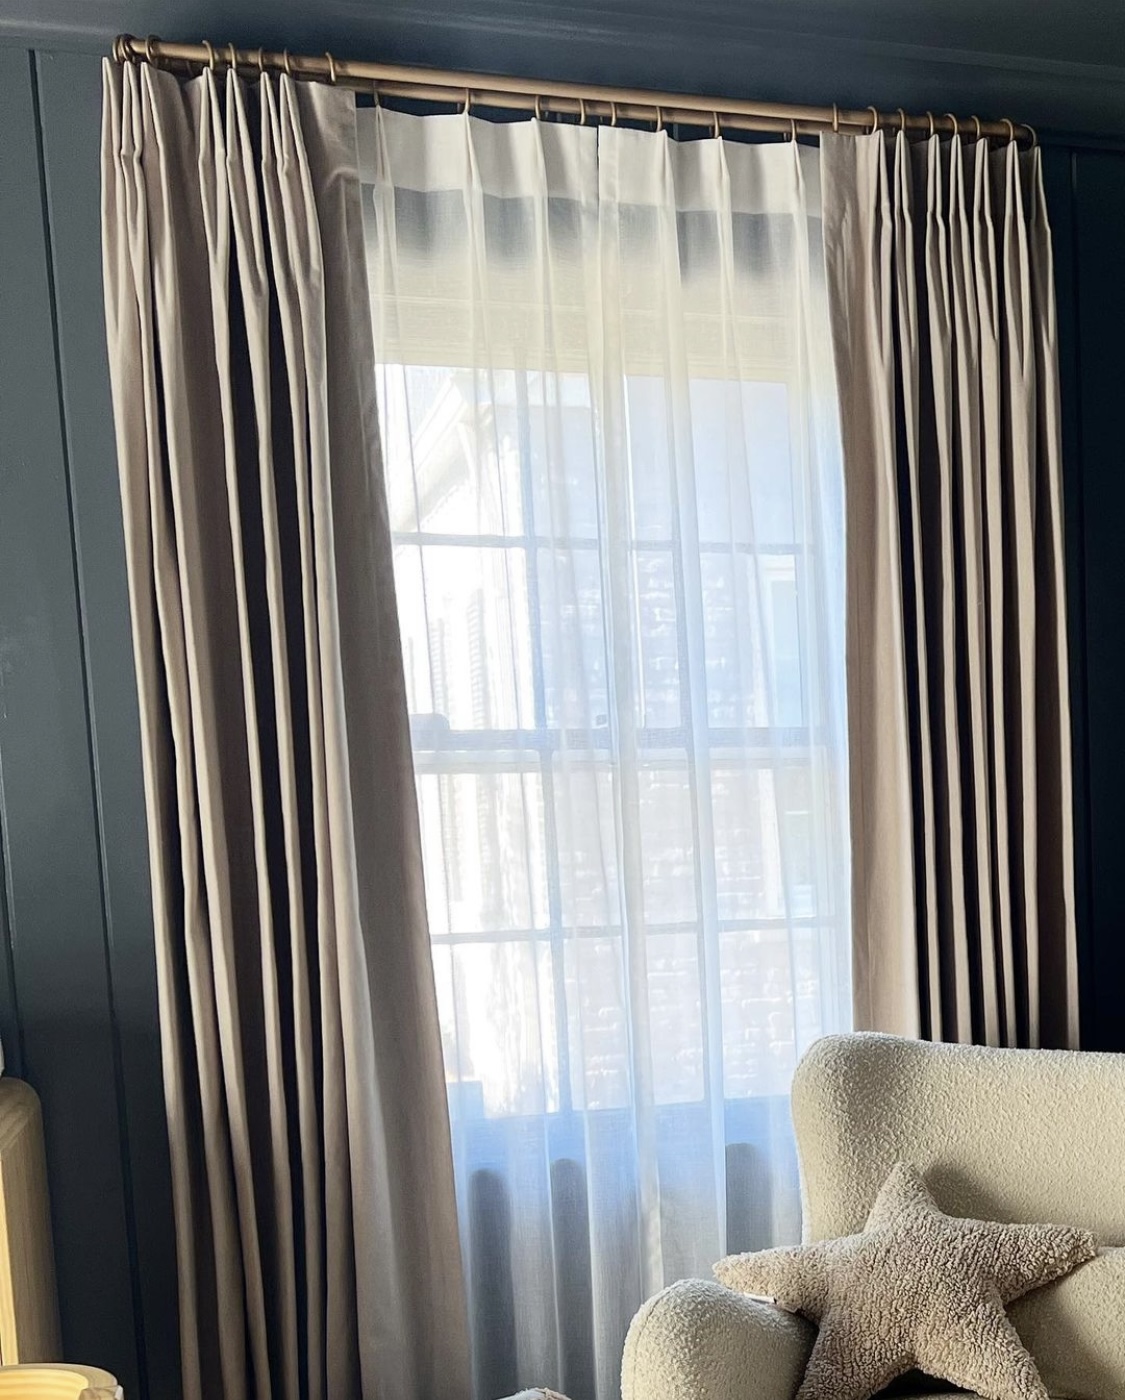 A sheer curtain covering a room window. It is layered beneath another window treatment.